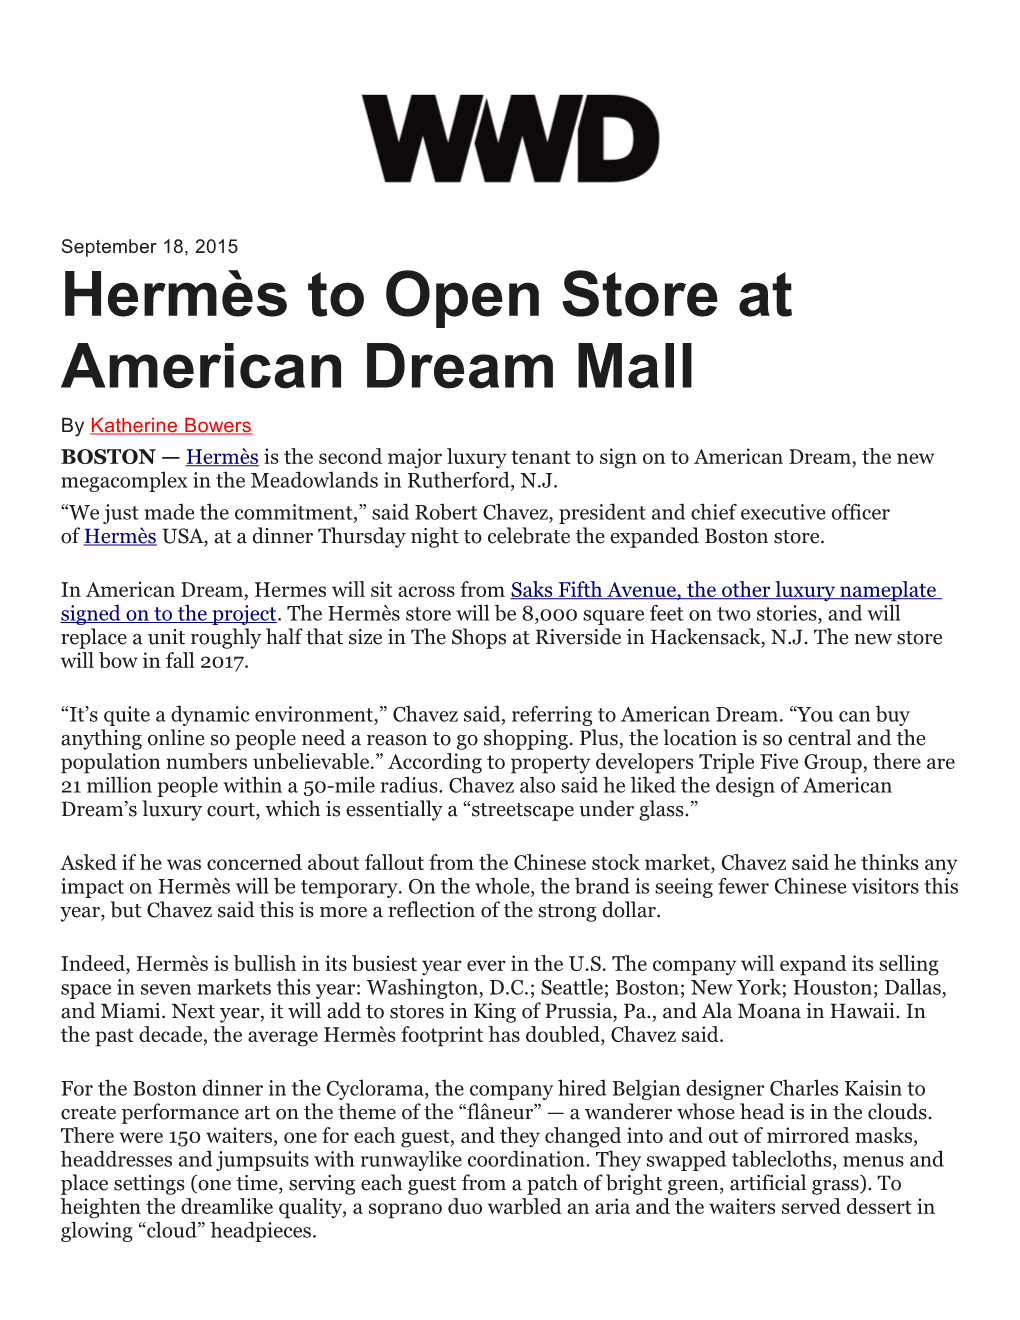 Hermès to Open Store at American Dream Mall